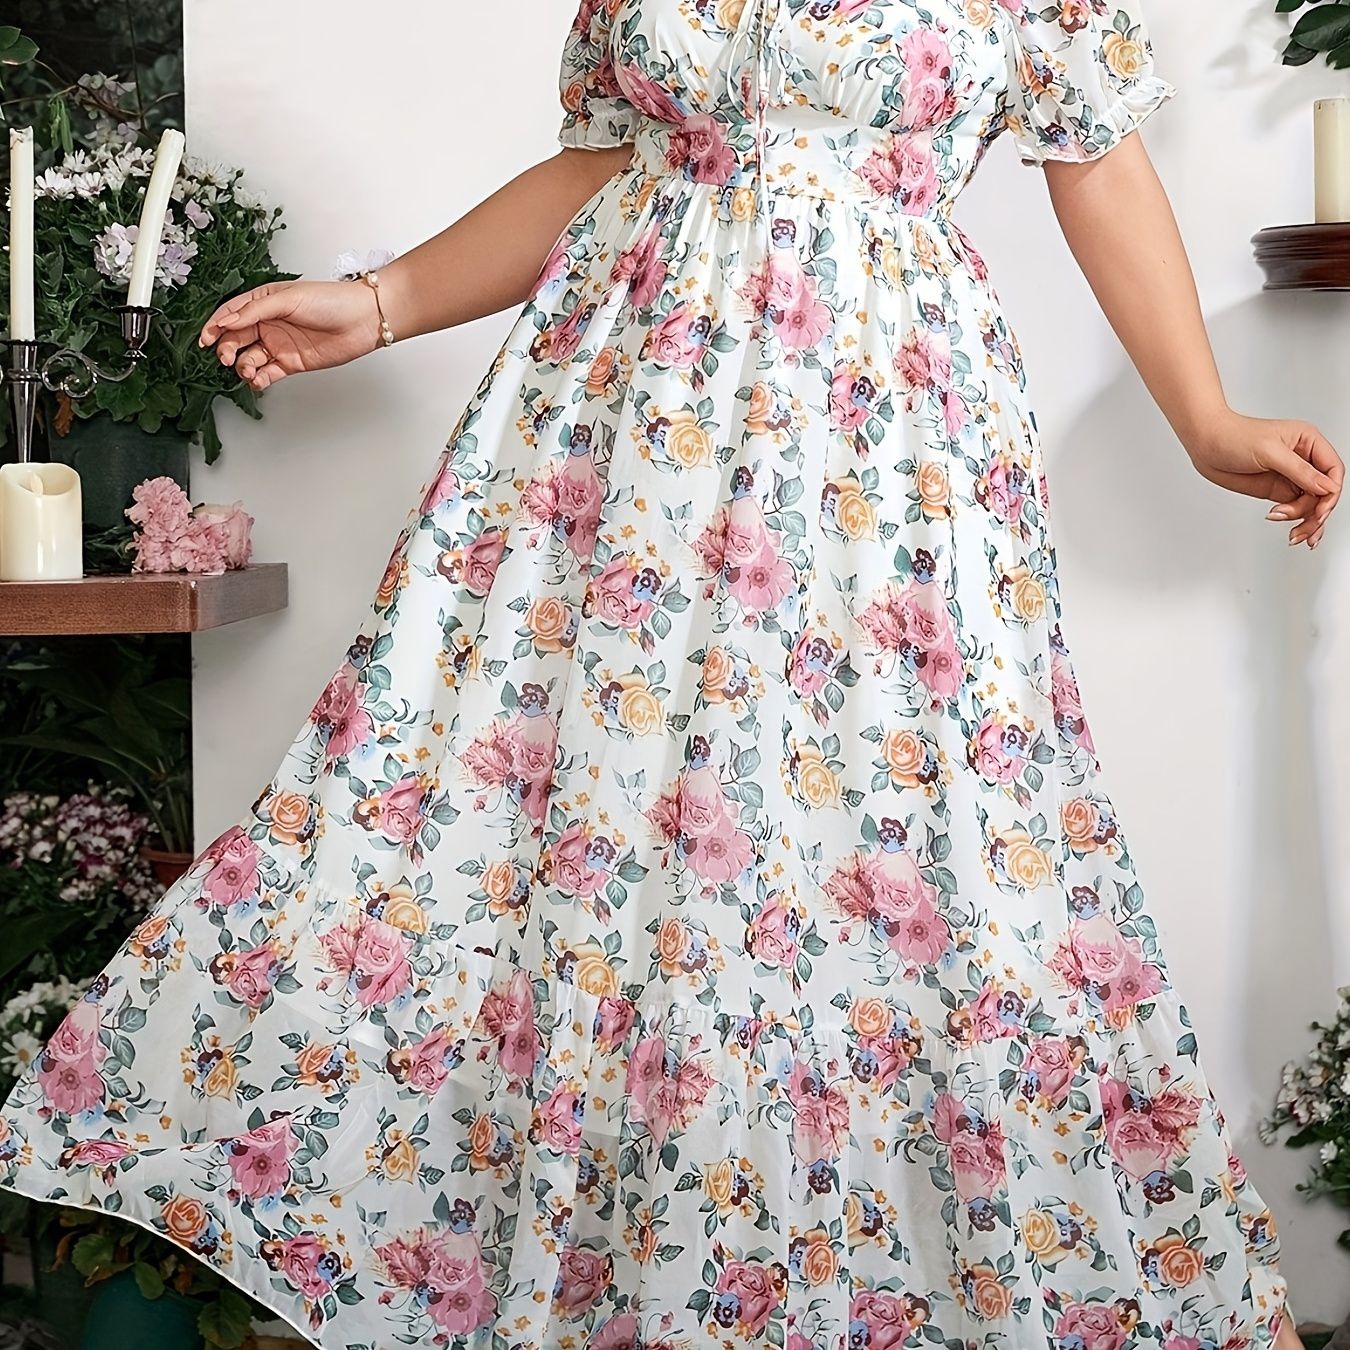 

Plus Size Floral Print Cinched Waist Dress, Elegant Short Sleeve Maxi Dress For Spring & Summer, Women's Plus Size Clothing